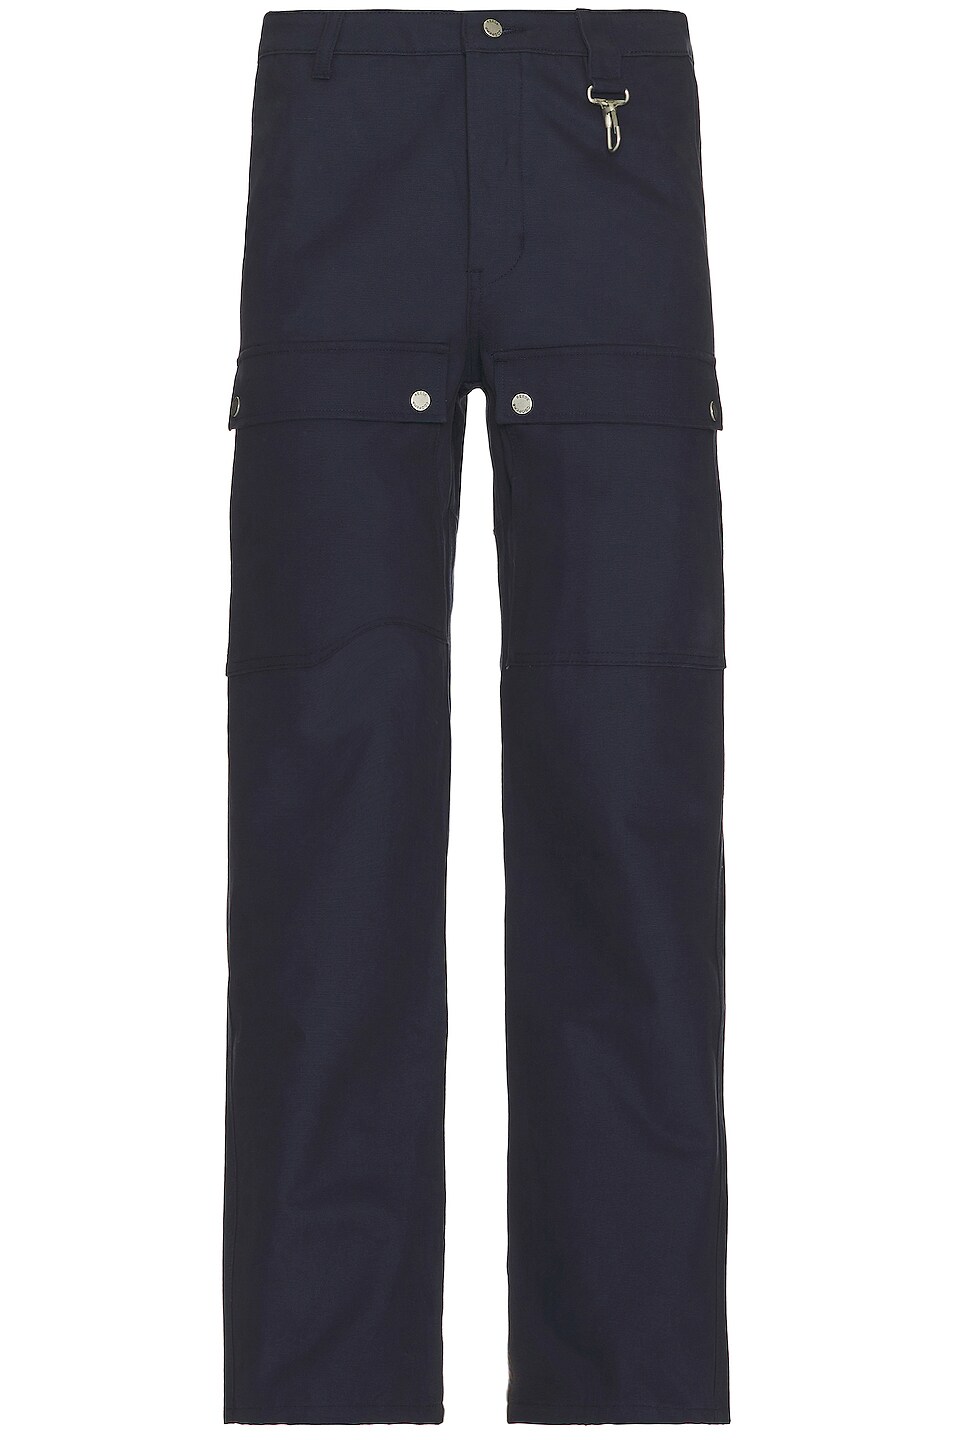 Image 1 of Reese Cooper Front Pocket Pant in Navy Blue